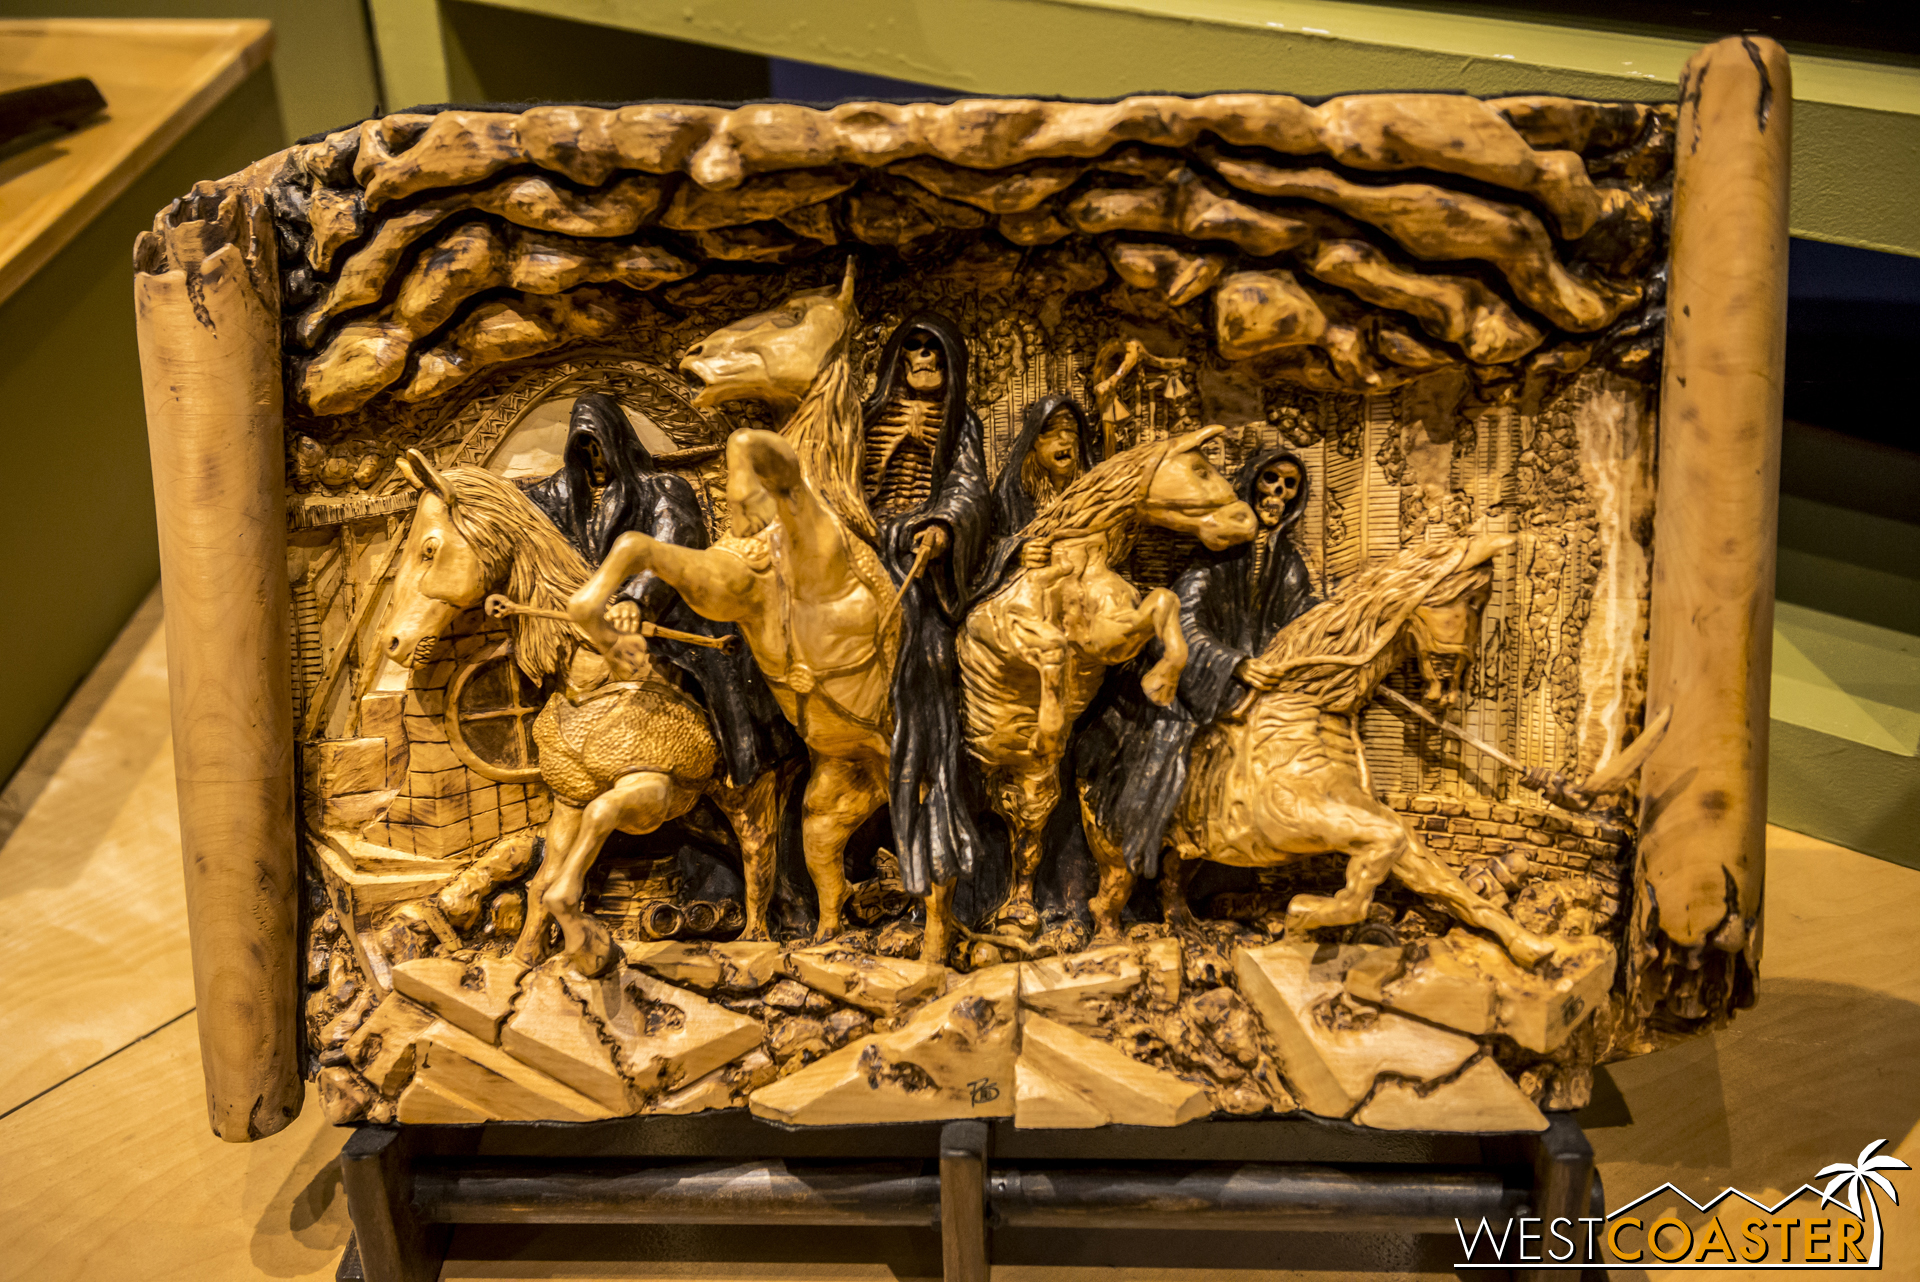  This Four Horsemen of the Apocalypse wood carving was extremely impressive. 